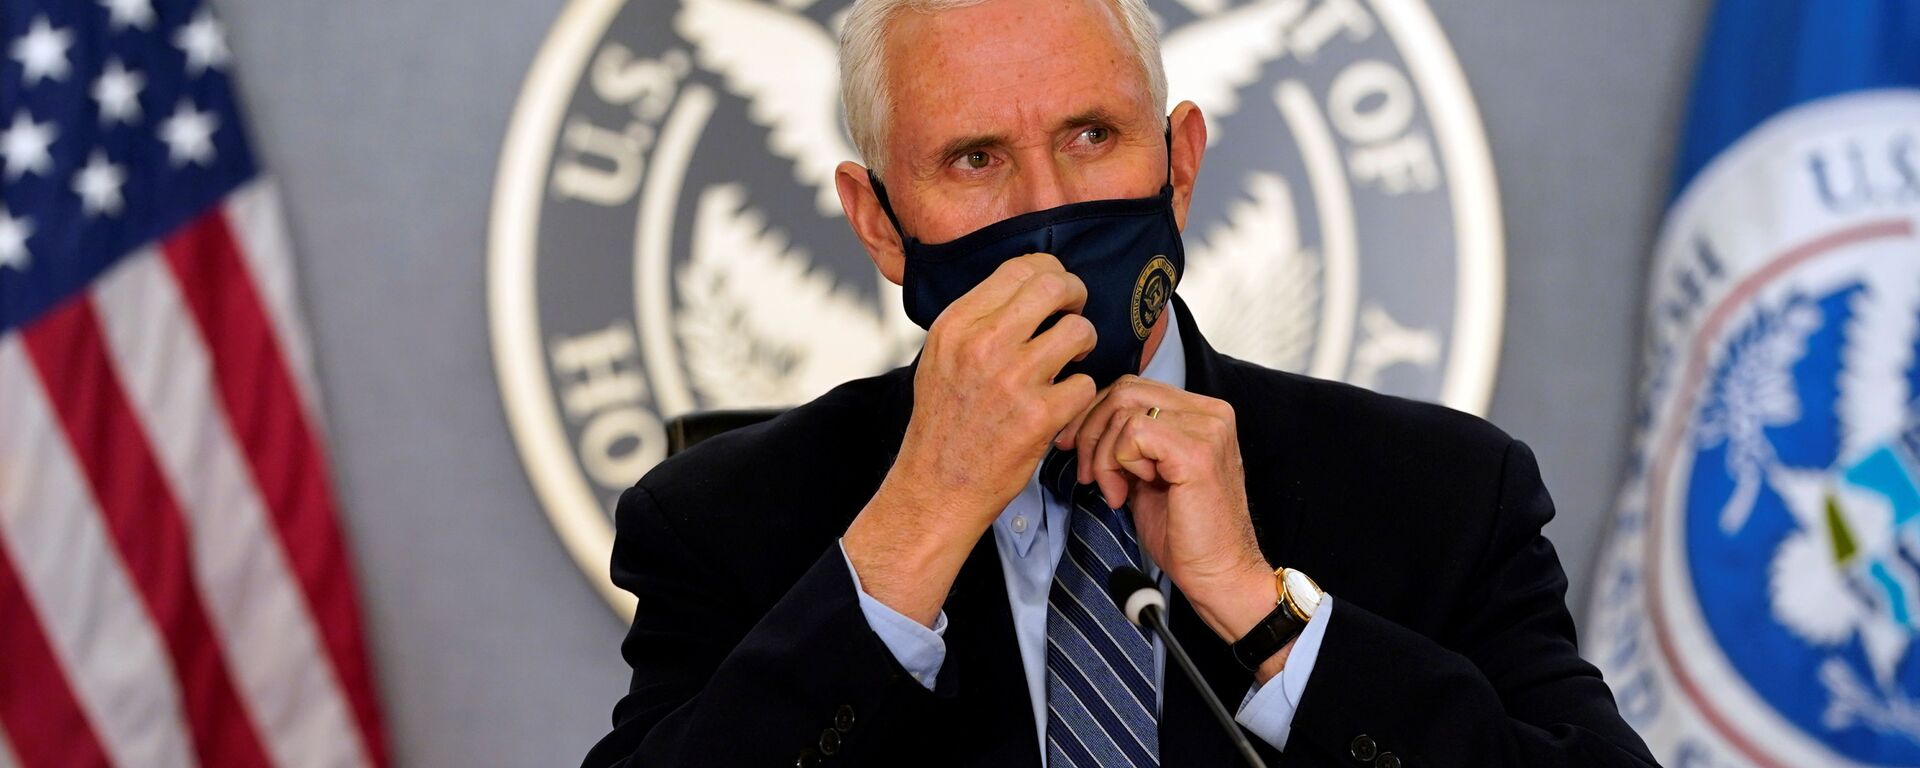 Vice President Mike Pence adjusts his face mask as he listens during a briefing about the upcoming presidential inauguration of President-elect Joe Biden and Vice President-elect Kamala Harris, at FEMA headquarters, January 14, 2021, in Washington - Sputnik International, 1920, 15.01.2021